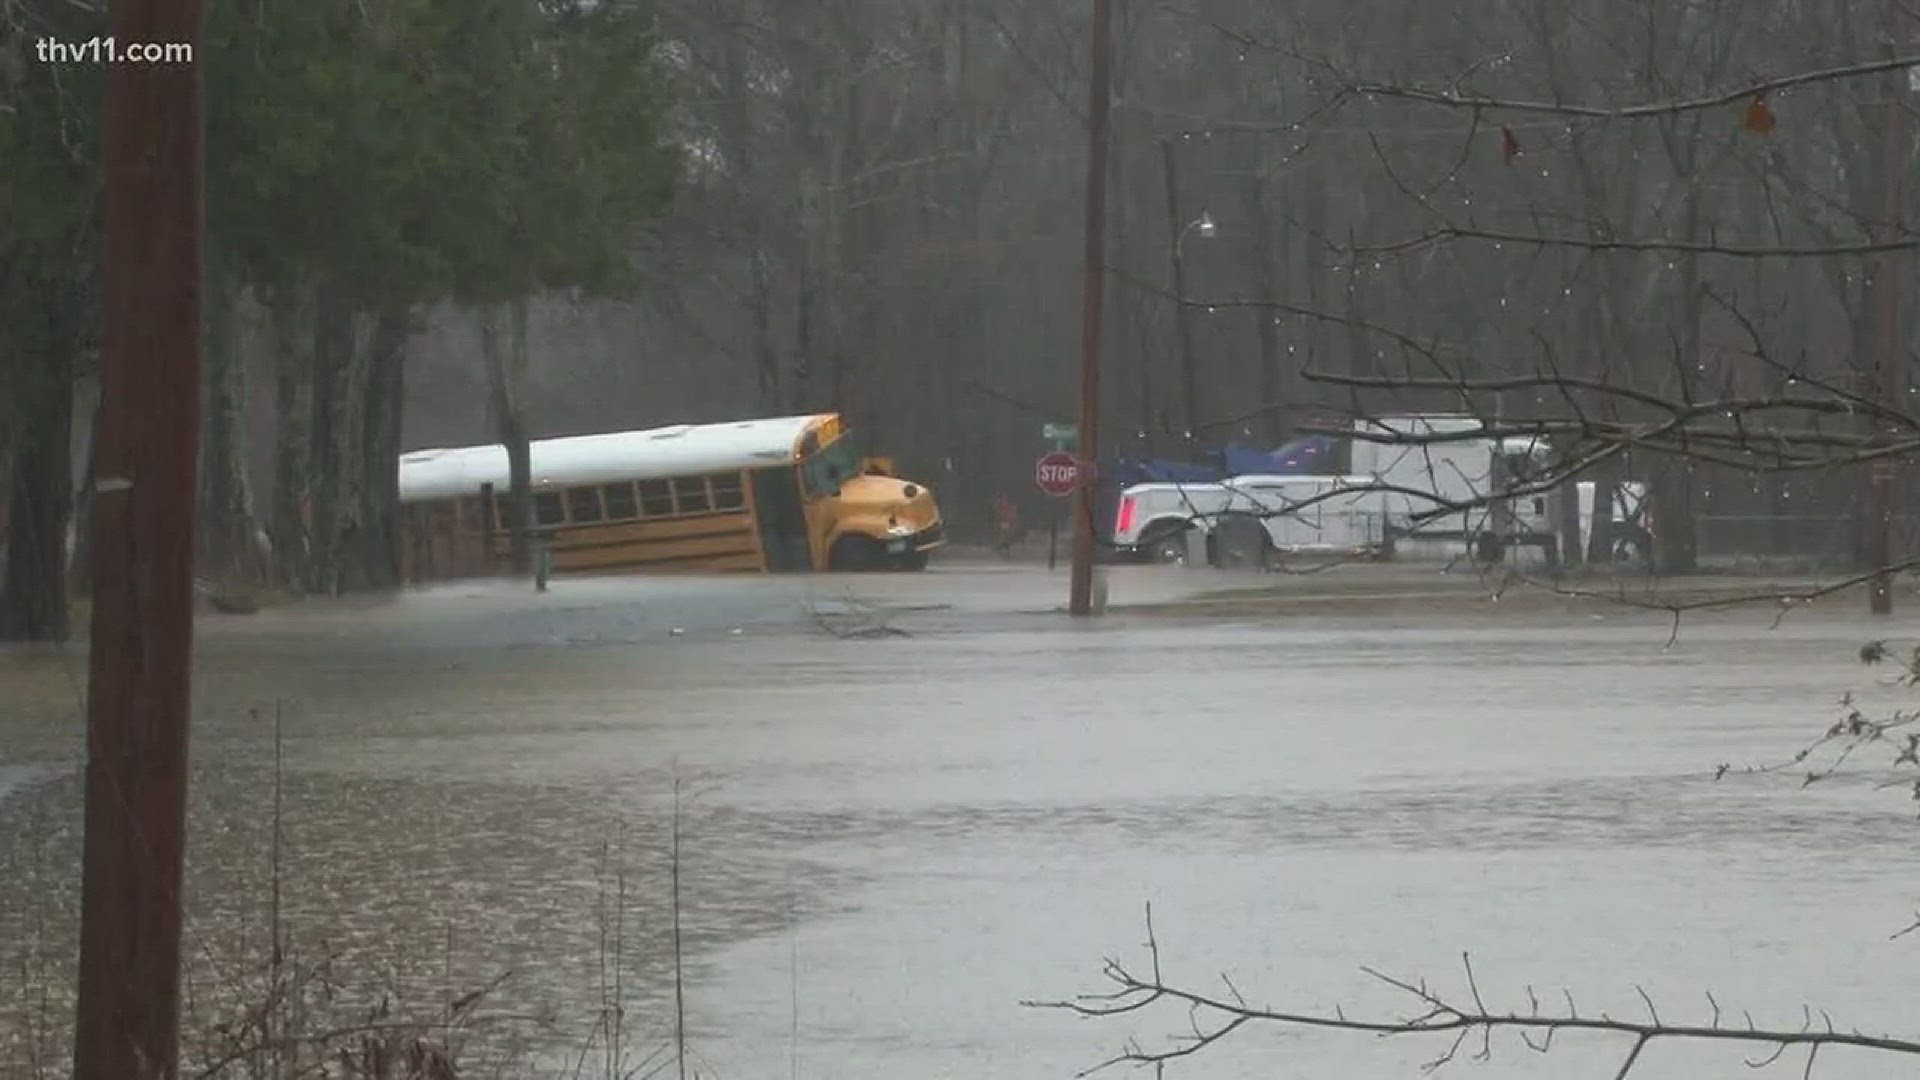 A Pulaski County Special School District bus got stuck after the driver attempted to drive through flooded waters.